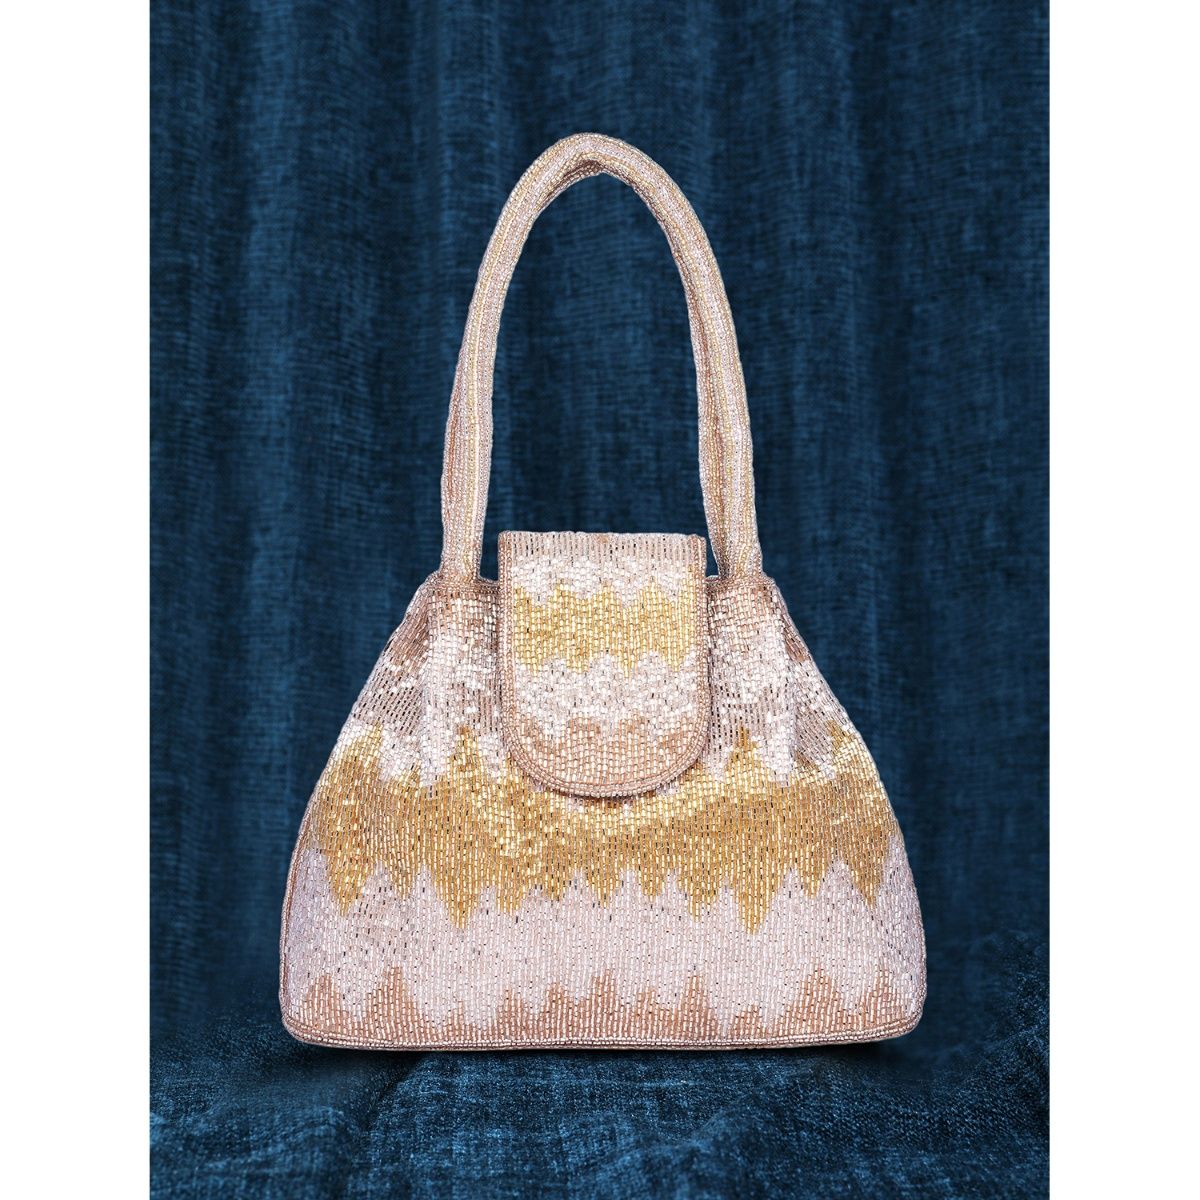 White Leather Fancy Ladies Hand Purse at Rs 1300 in Kanpur | ID: 24747093288